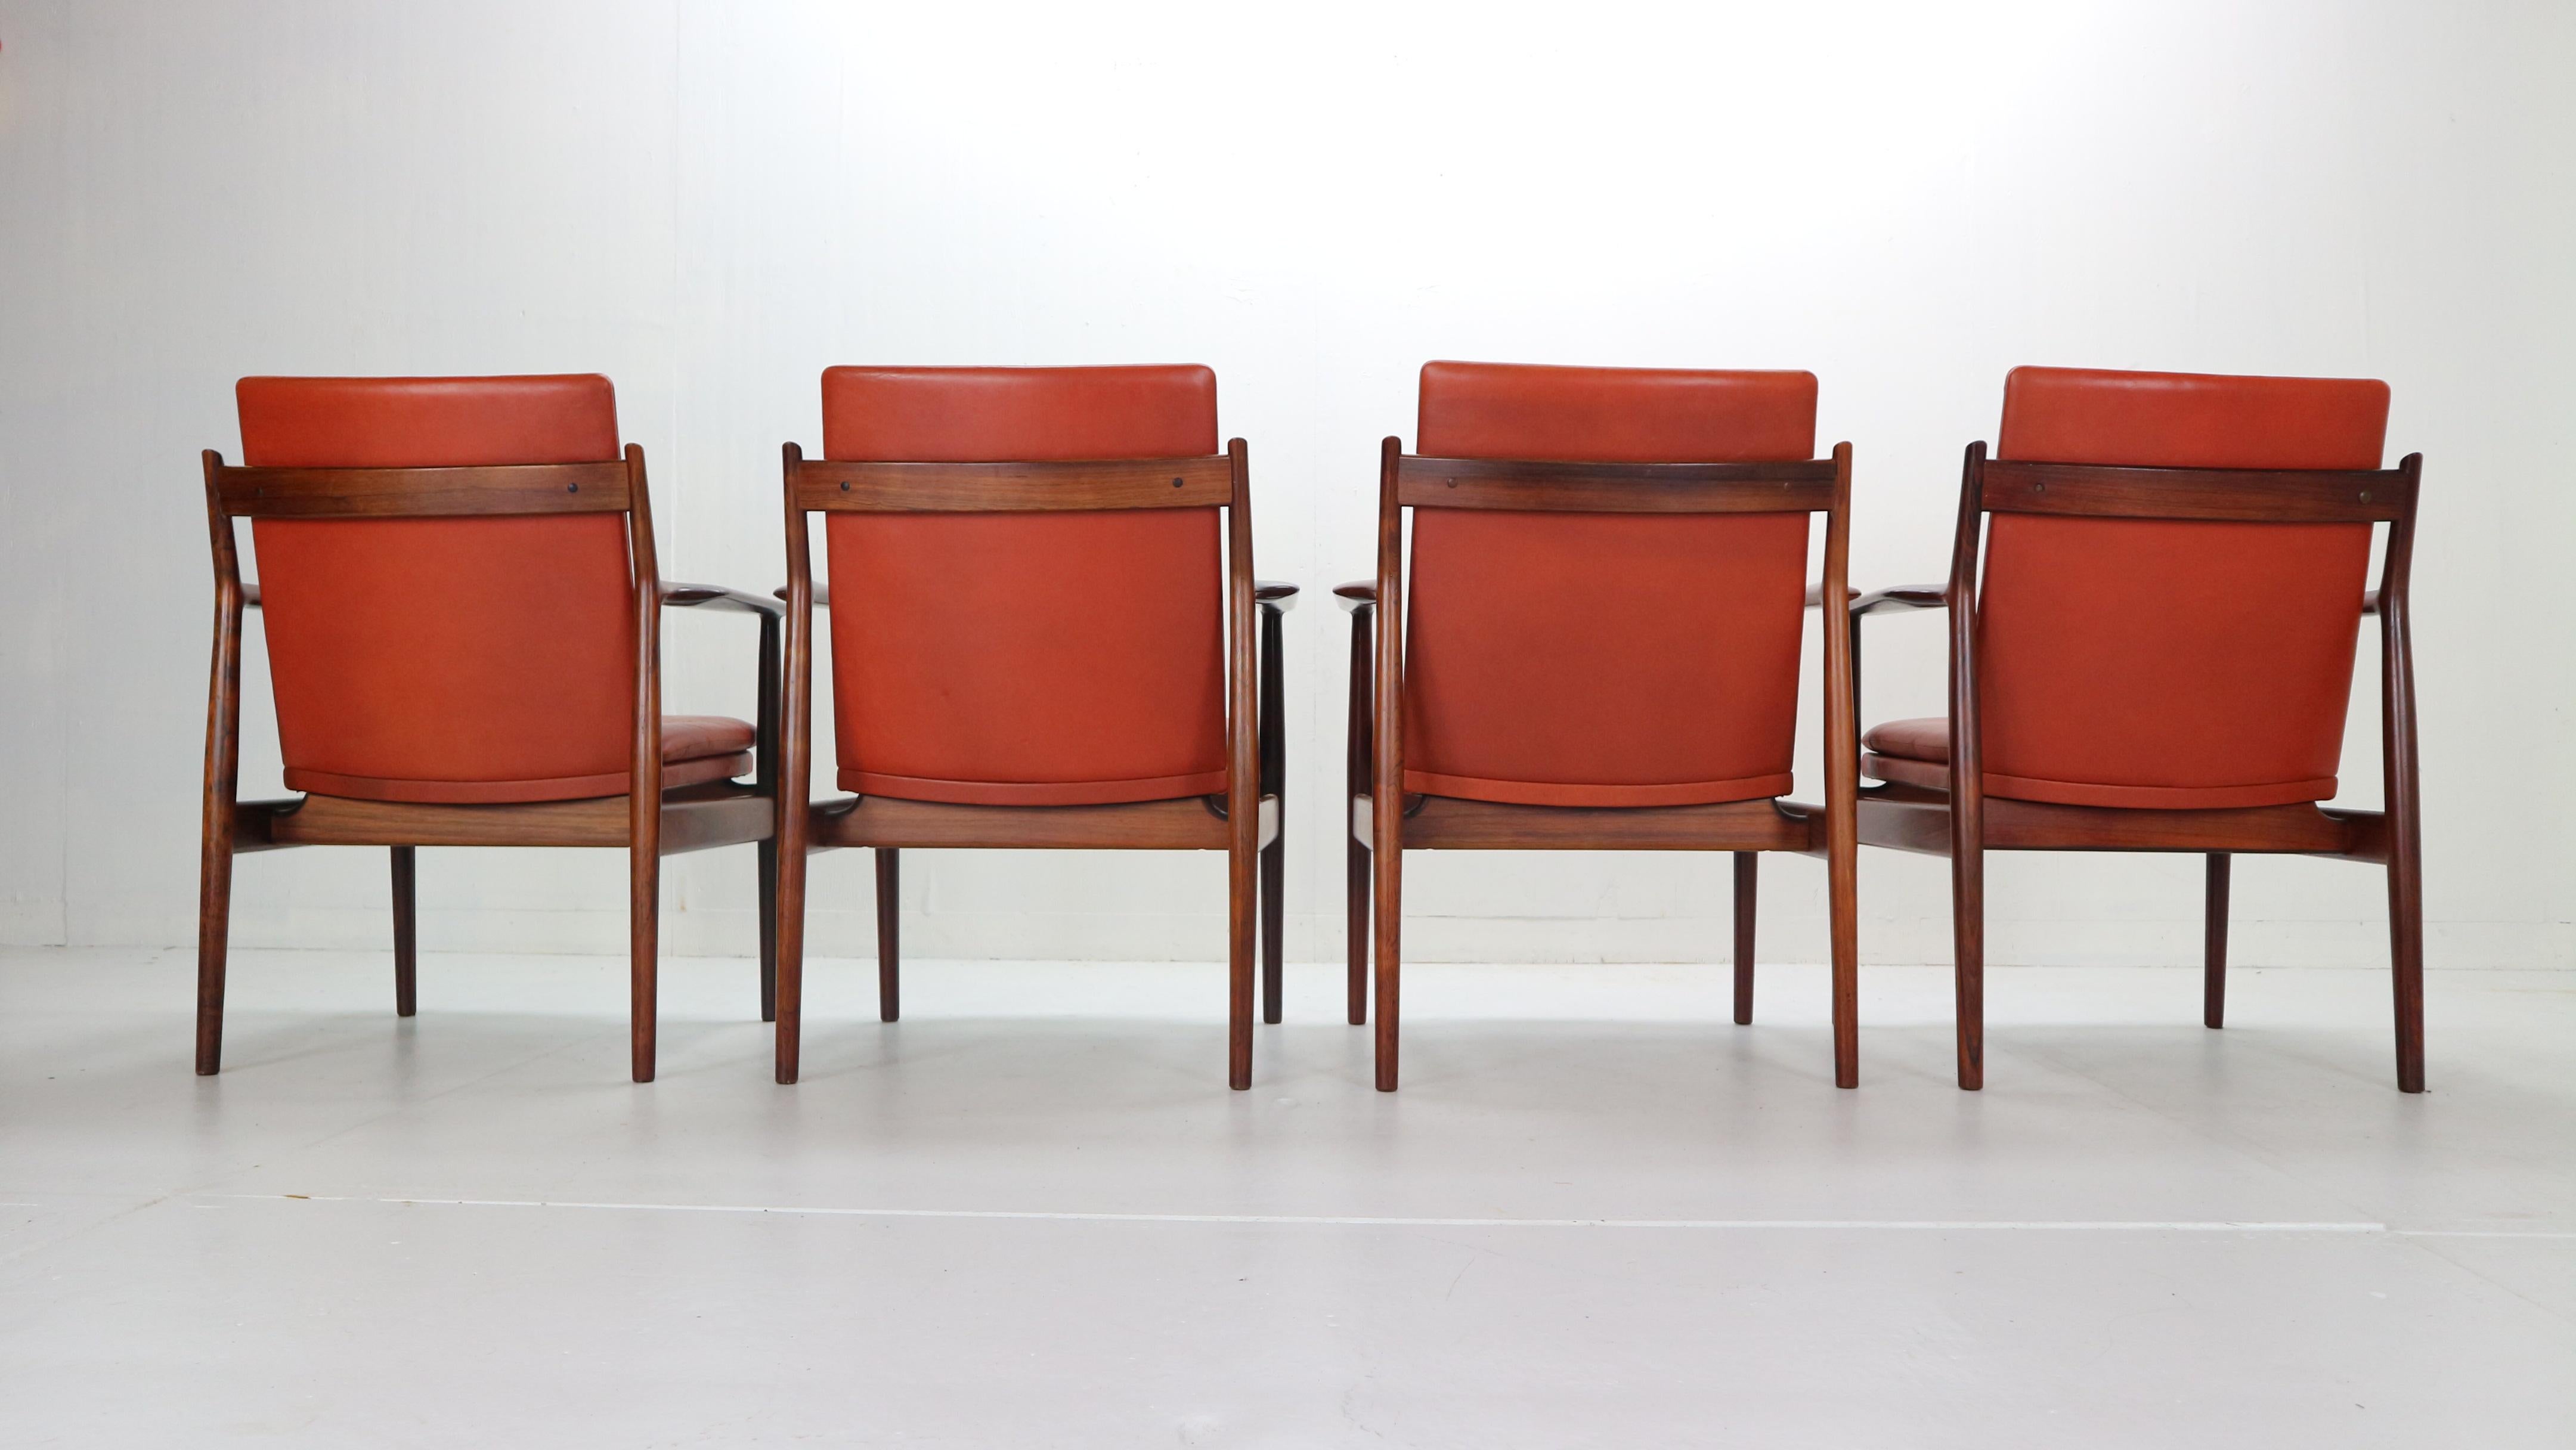 Mid-20th Century Arne Vodder Set of 4 Red Leather Armchairs for Sibast, 1960s Denmark